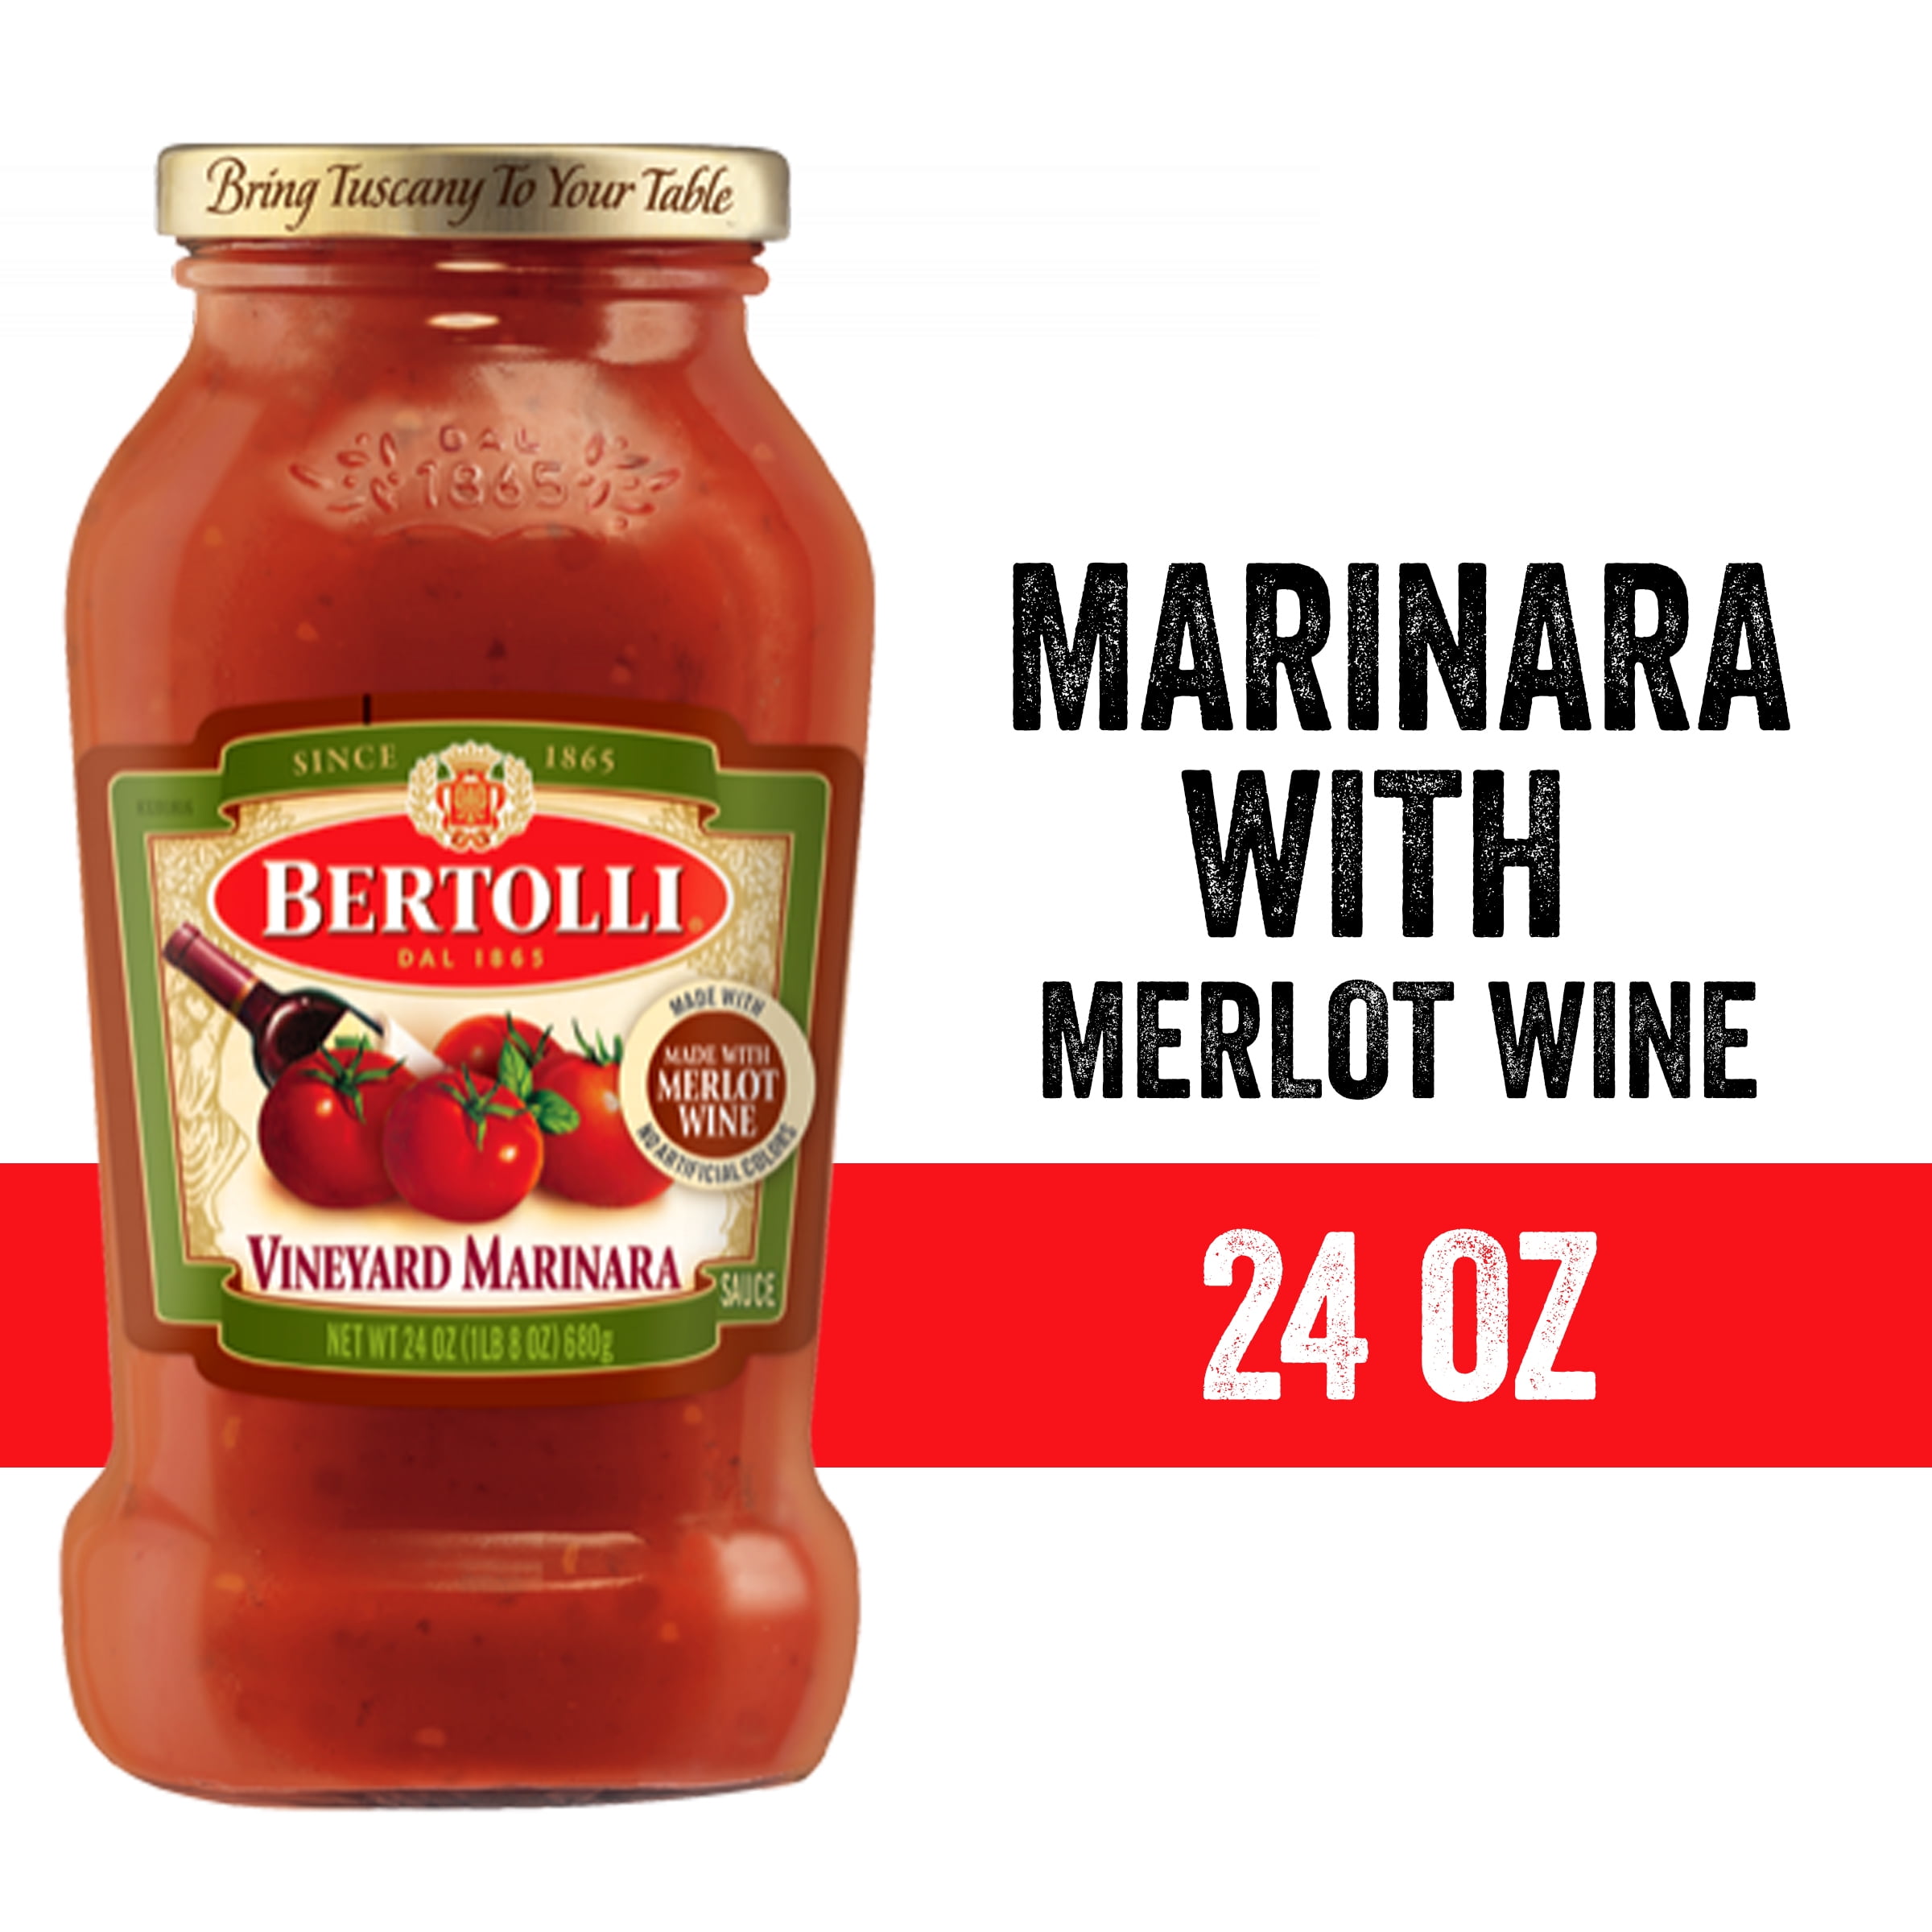 Bertolli Vineyard Marinara Sauce with Merlot Wine, Authentic Tuscan Style Pasta Sauce Made with Vine-Ripened Tomatoes, Herbs and Spices and Merlot, 24 OZ